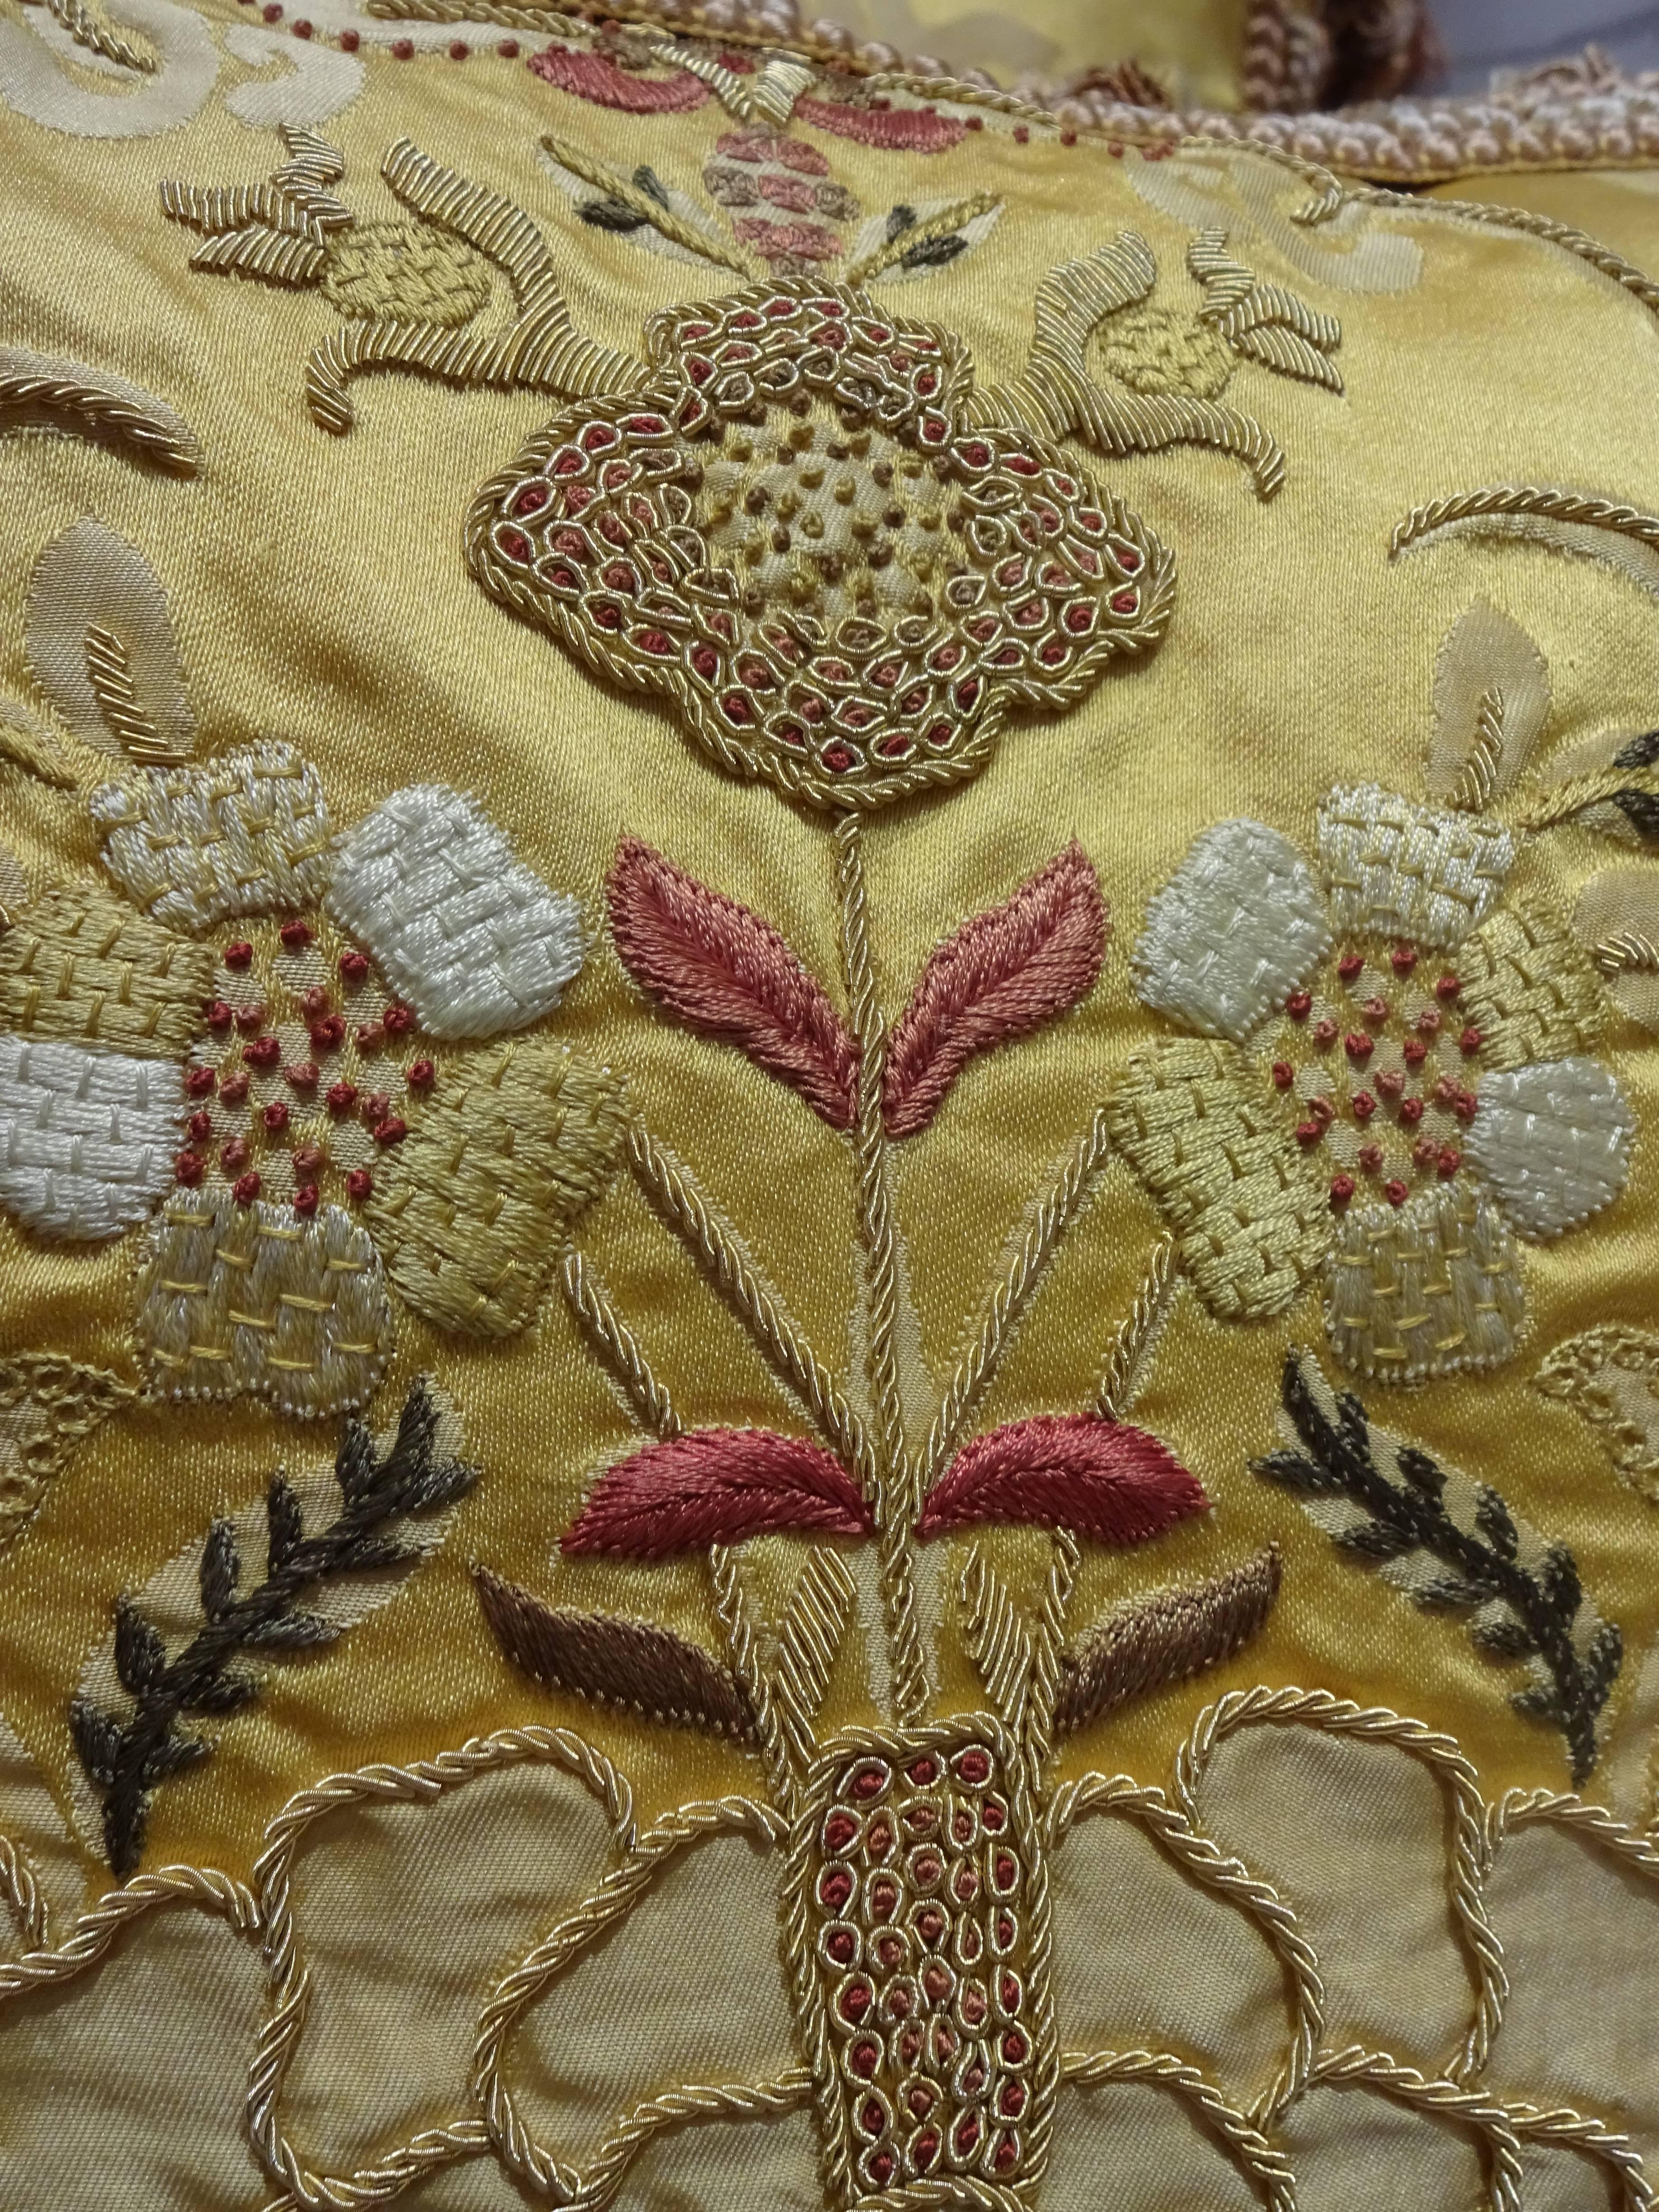 Silk Exquisite Embroidered Pillows, Scalamandre Fabric